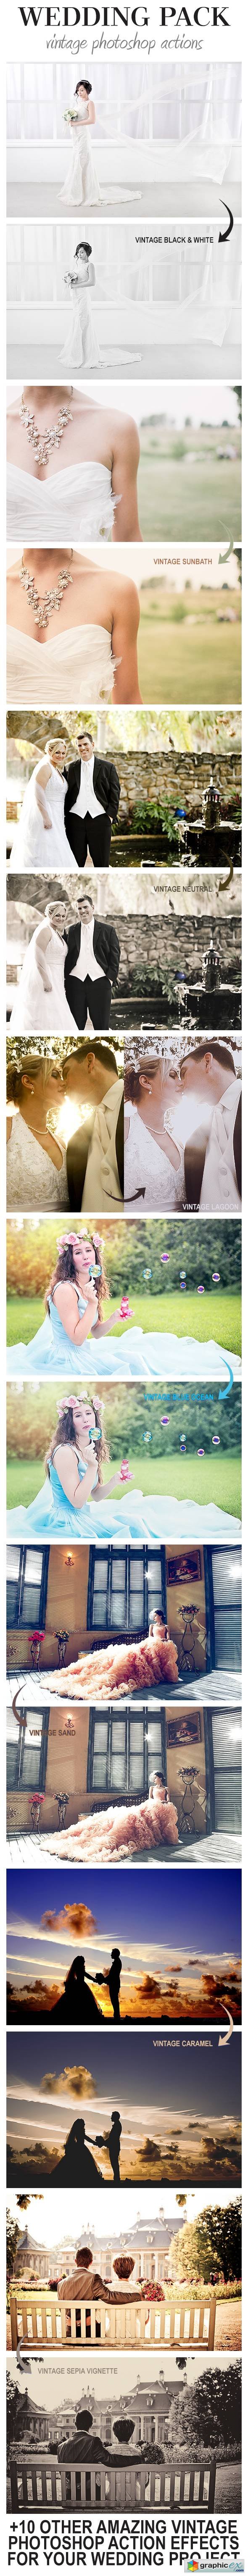 Wedding Pack - Vintage Photoshop Actions